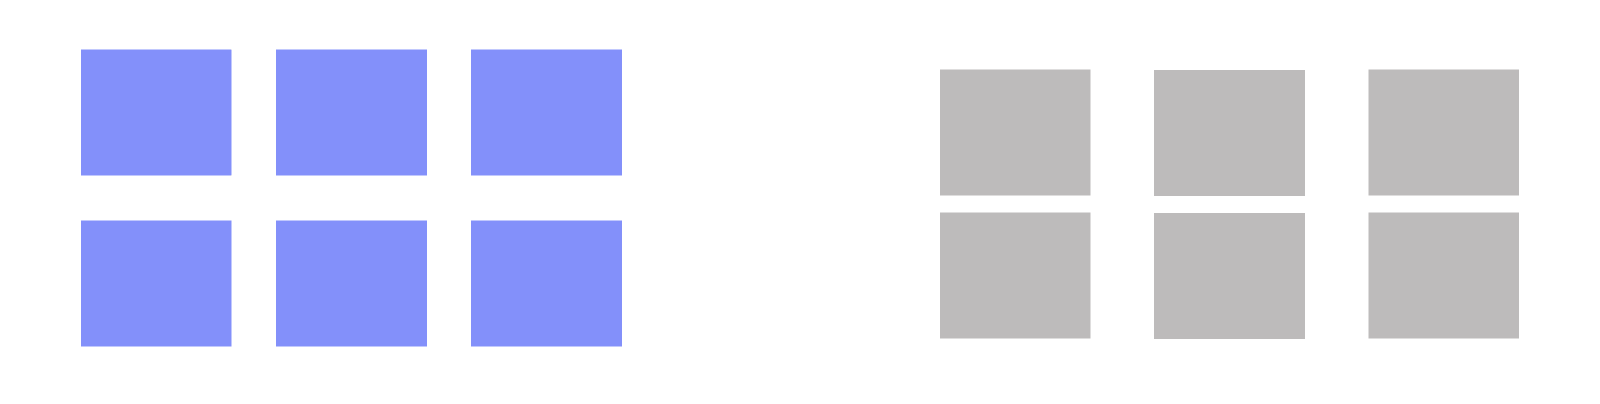 12 squares are arranged in two groups. The group on the left has equal spacing between each square. The group on the right has three columns of two squares with wider spacing between the columns. 